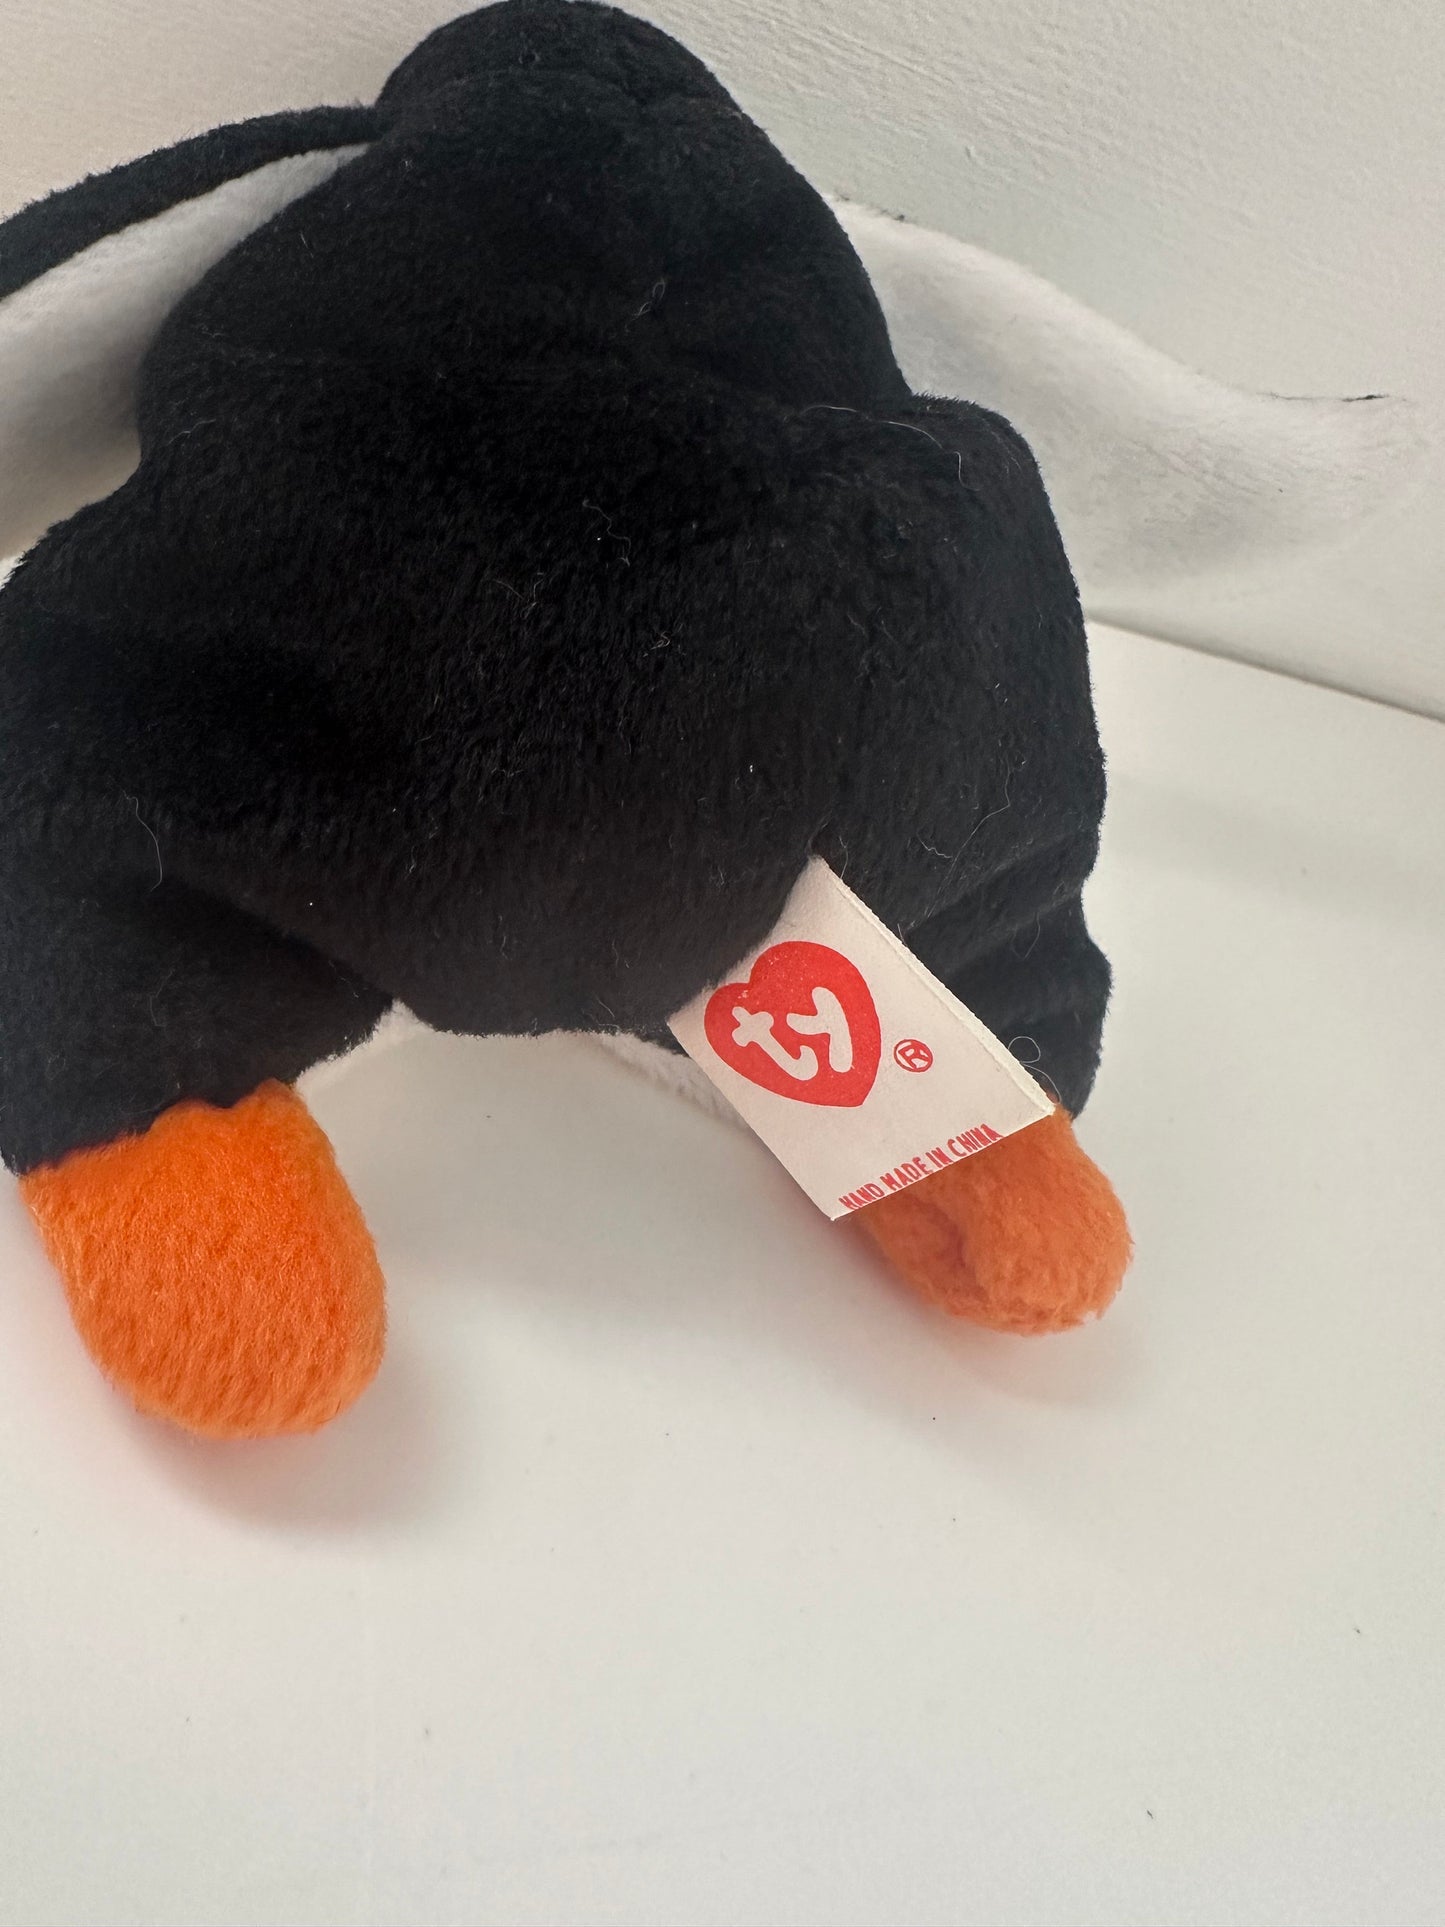 TY Beanie Baby “Waddle” the Penguin - 2nd Gen Tush Tag, No Hang Tag! (6 inch)